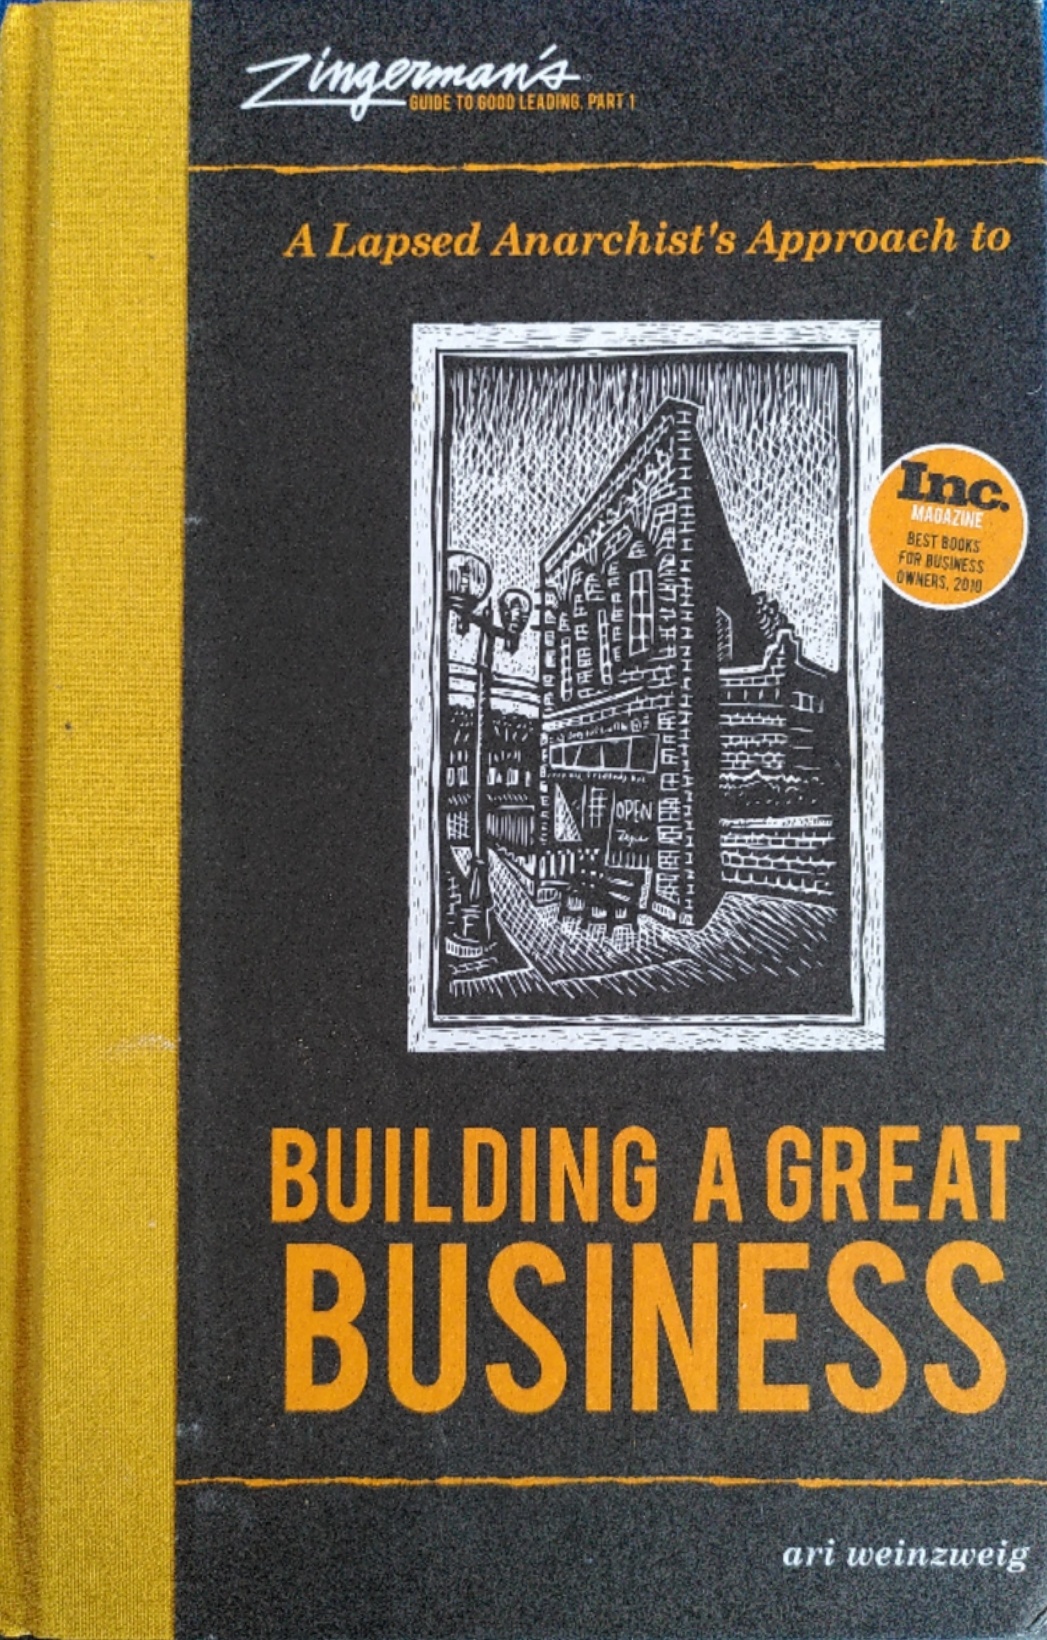 Ari Weinzweig: A lapsed anarchist's approach to building a great business (Zingerman's Press)